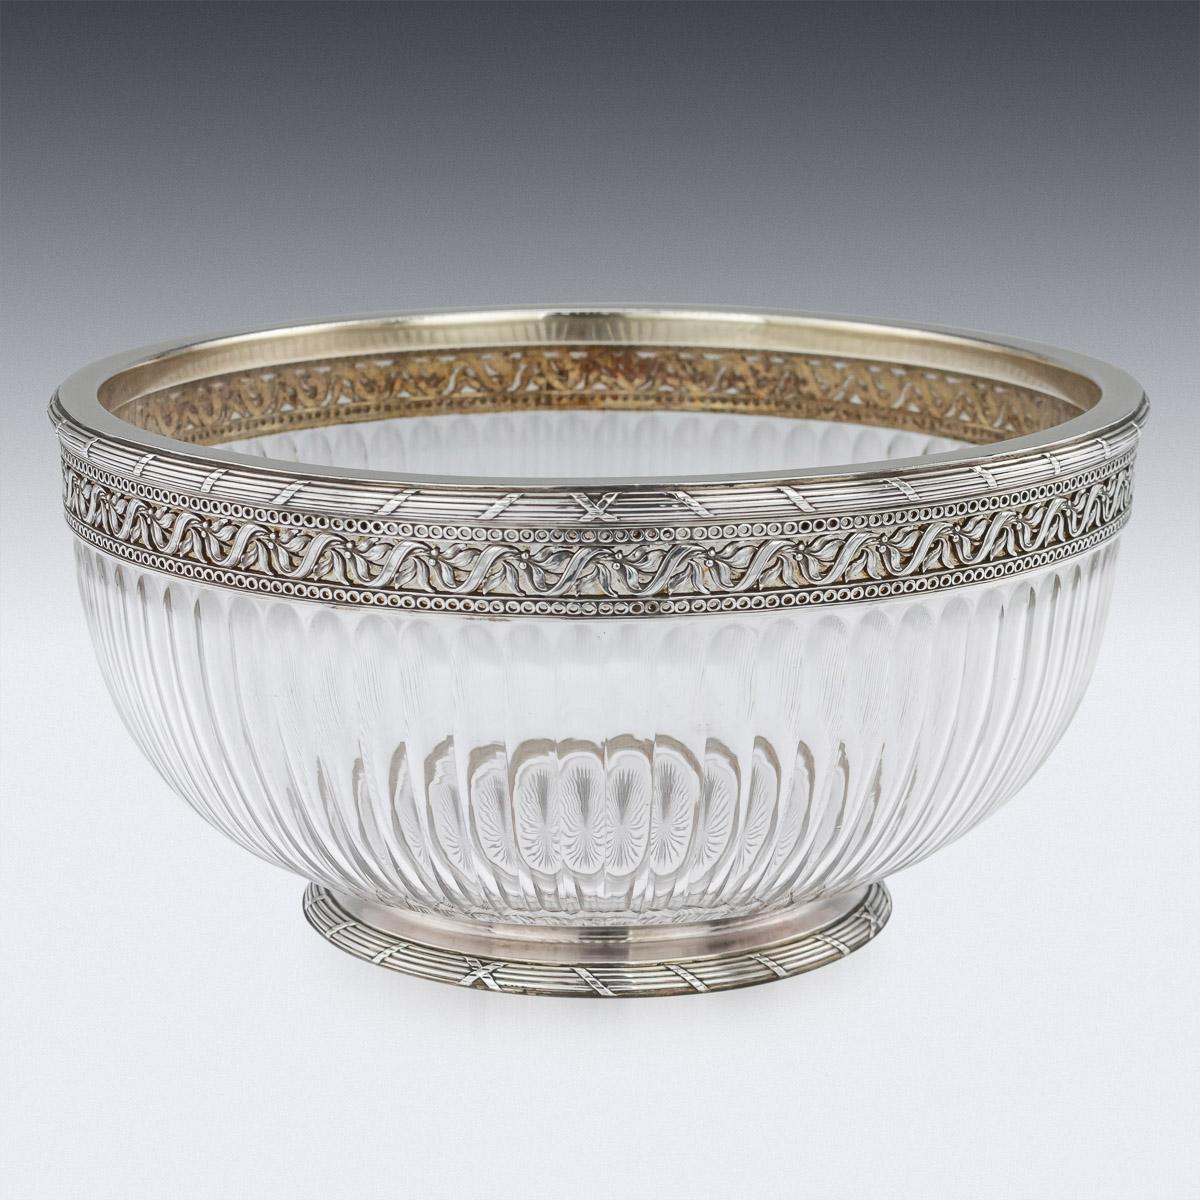 20th Century French Empire Solid Silver & Glass Bowl, Paris, c.1900 In Good Condition For Sale In Royal Tunbridge Wells, Kent